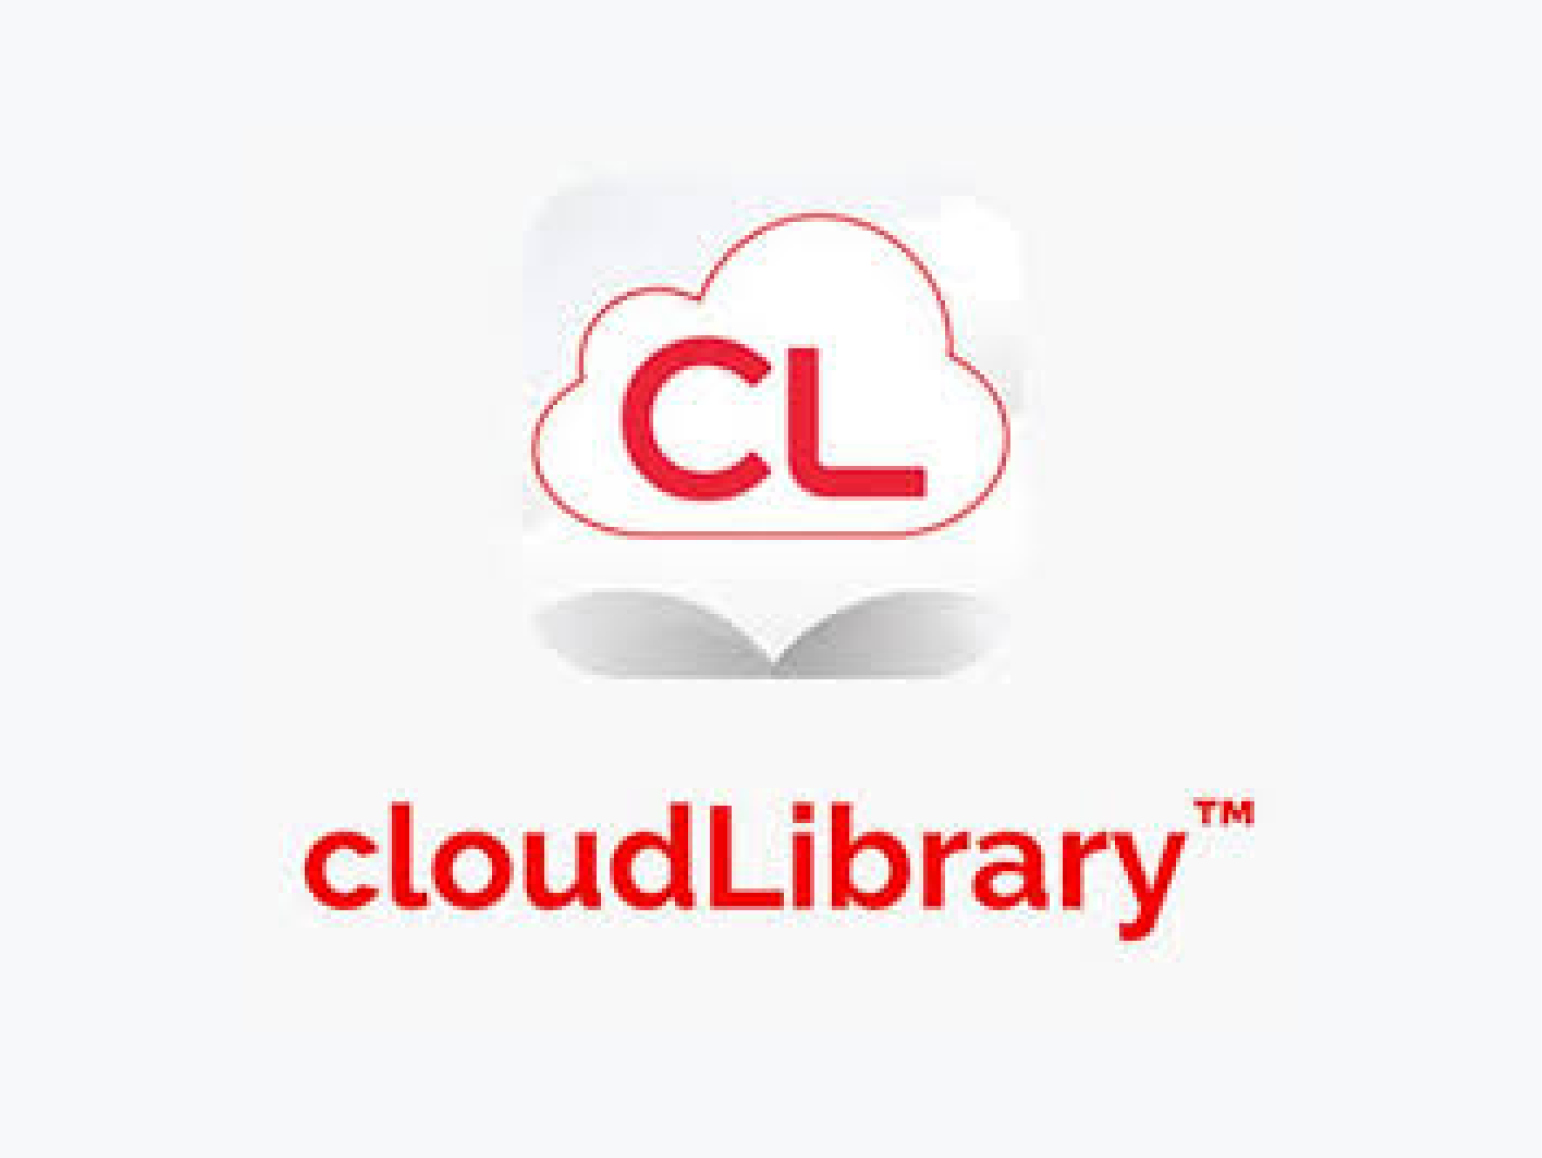 cloudlibrary